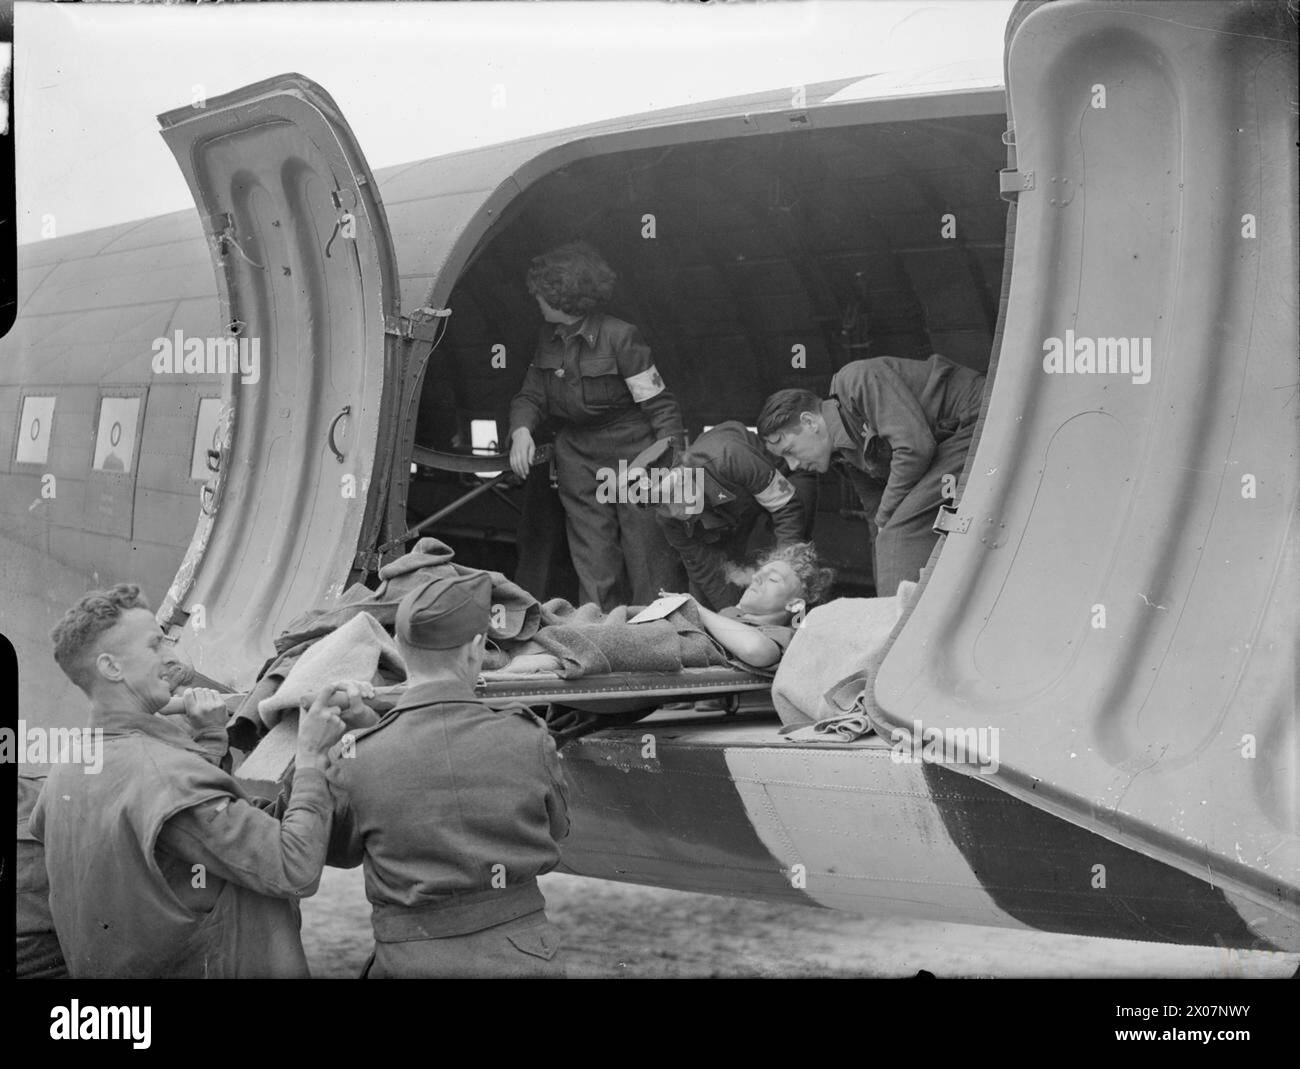 ROYAL AIR FORCE TRANSPORT COMMAND, 1943-1945. - Aircrew and WAAF nursing orderlies help to load a battle casualty on a stretcher into a Douglas Dakota Mark III of No. 233 Squadron RAF at B2/Bazenville, Normandy. The RAF's first 'casevac' flights to France were mounted by Dakotas of No. 46 Group on 13 June 1944, and the WAAF nursing orderlies pictured were the first women to be employed on these duties  Royal Air Force, Maintenance Unit, 235, Royal Air Force, Women's Auxiliary Air Force Stock Photo